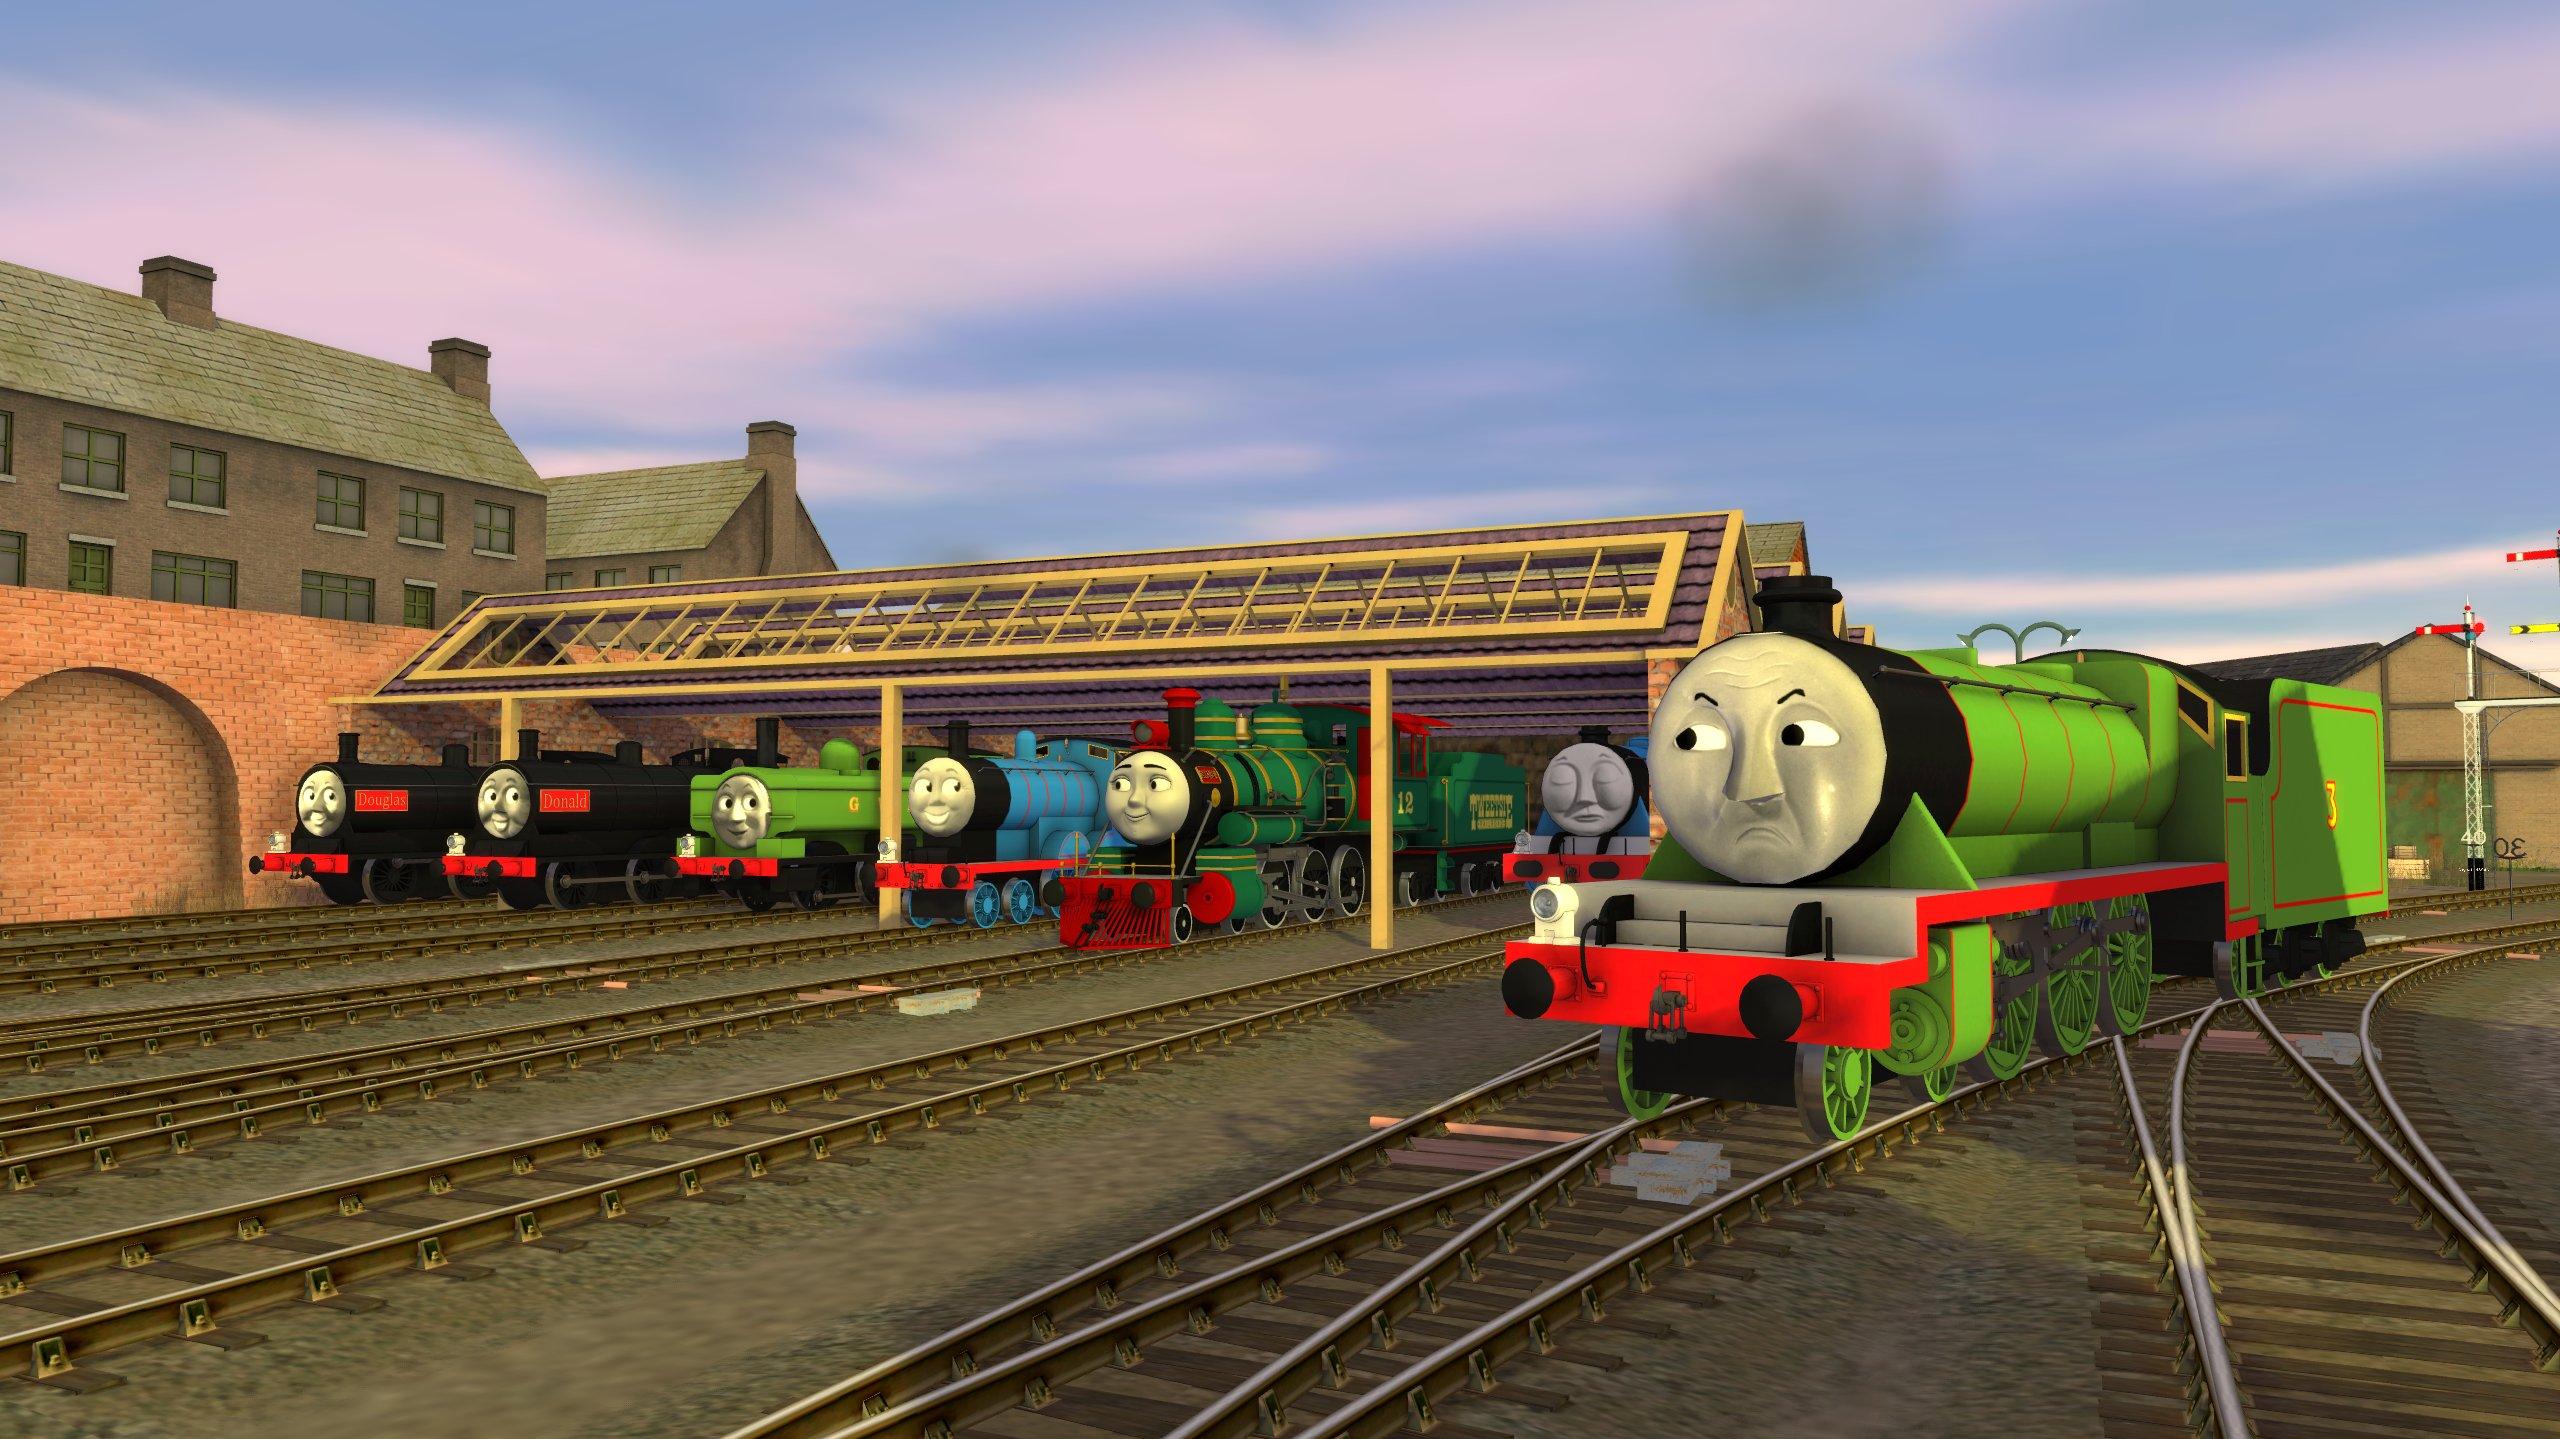 Edwardking02 On X A Special Visitor Arrived At The Sheds And